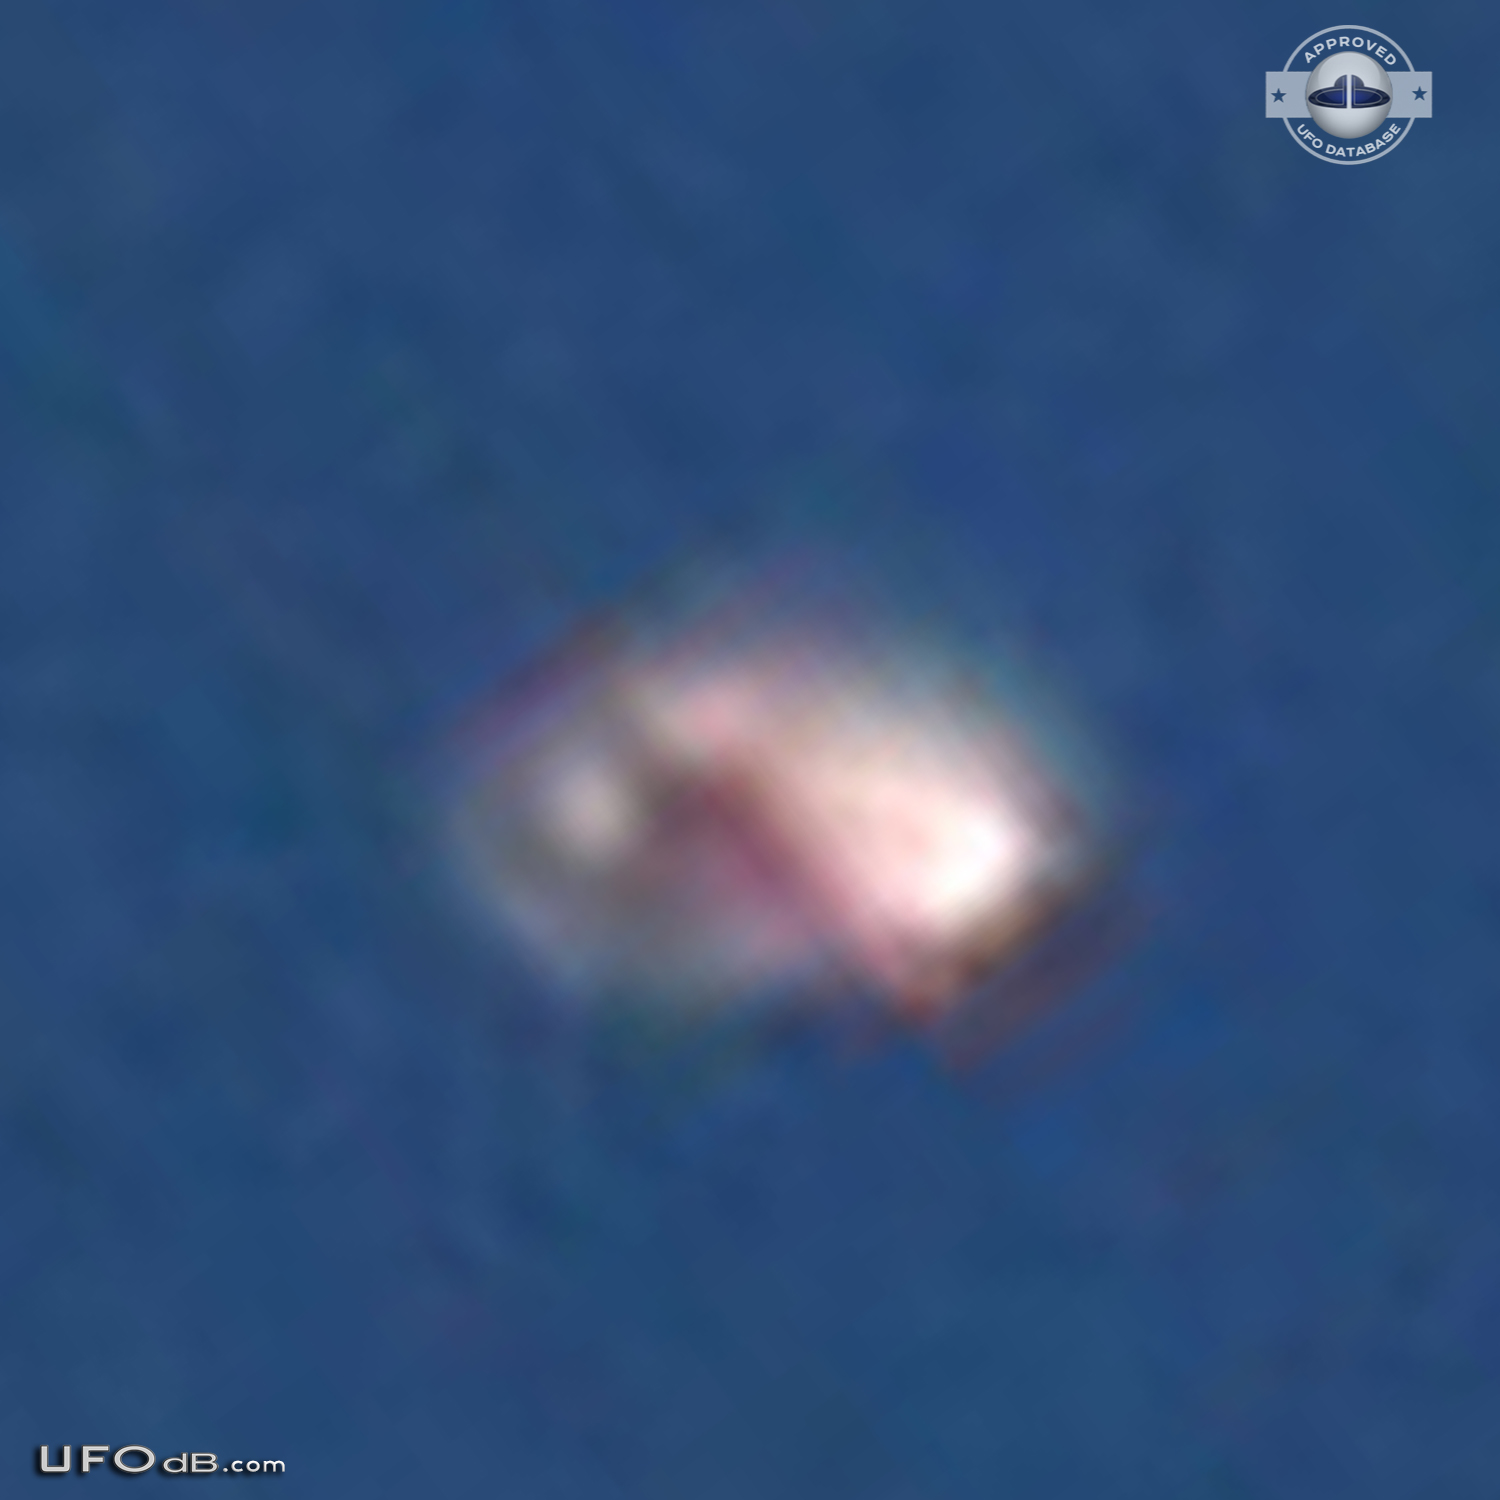 Very bright reflective UFO - Thousands Oaks California - pictures 2012 UFO Picture #516-5